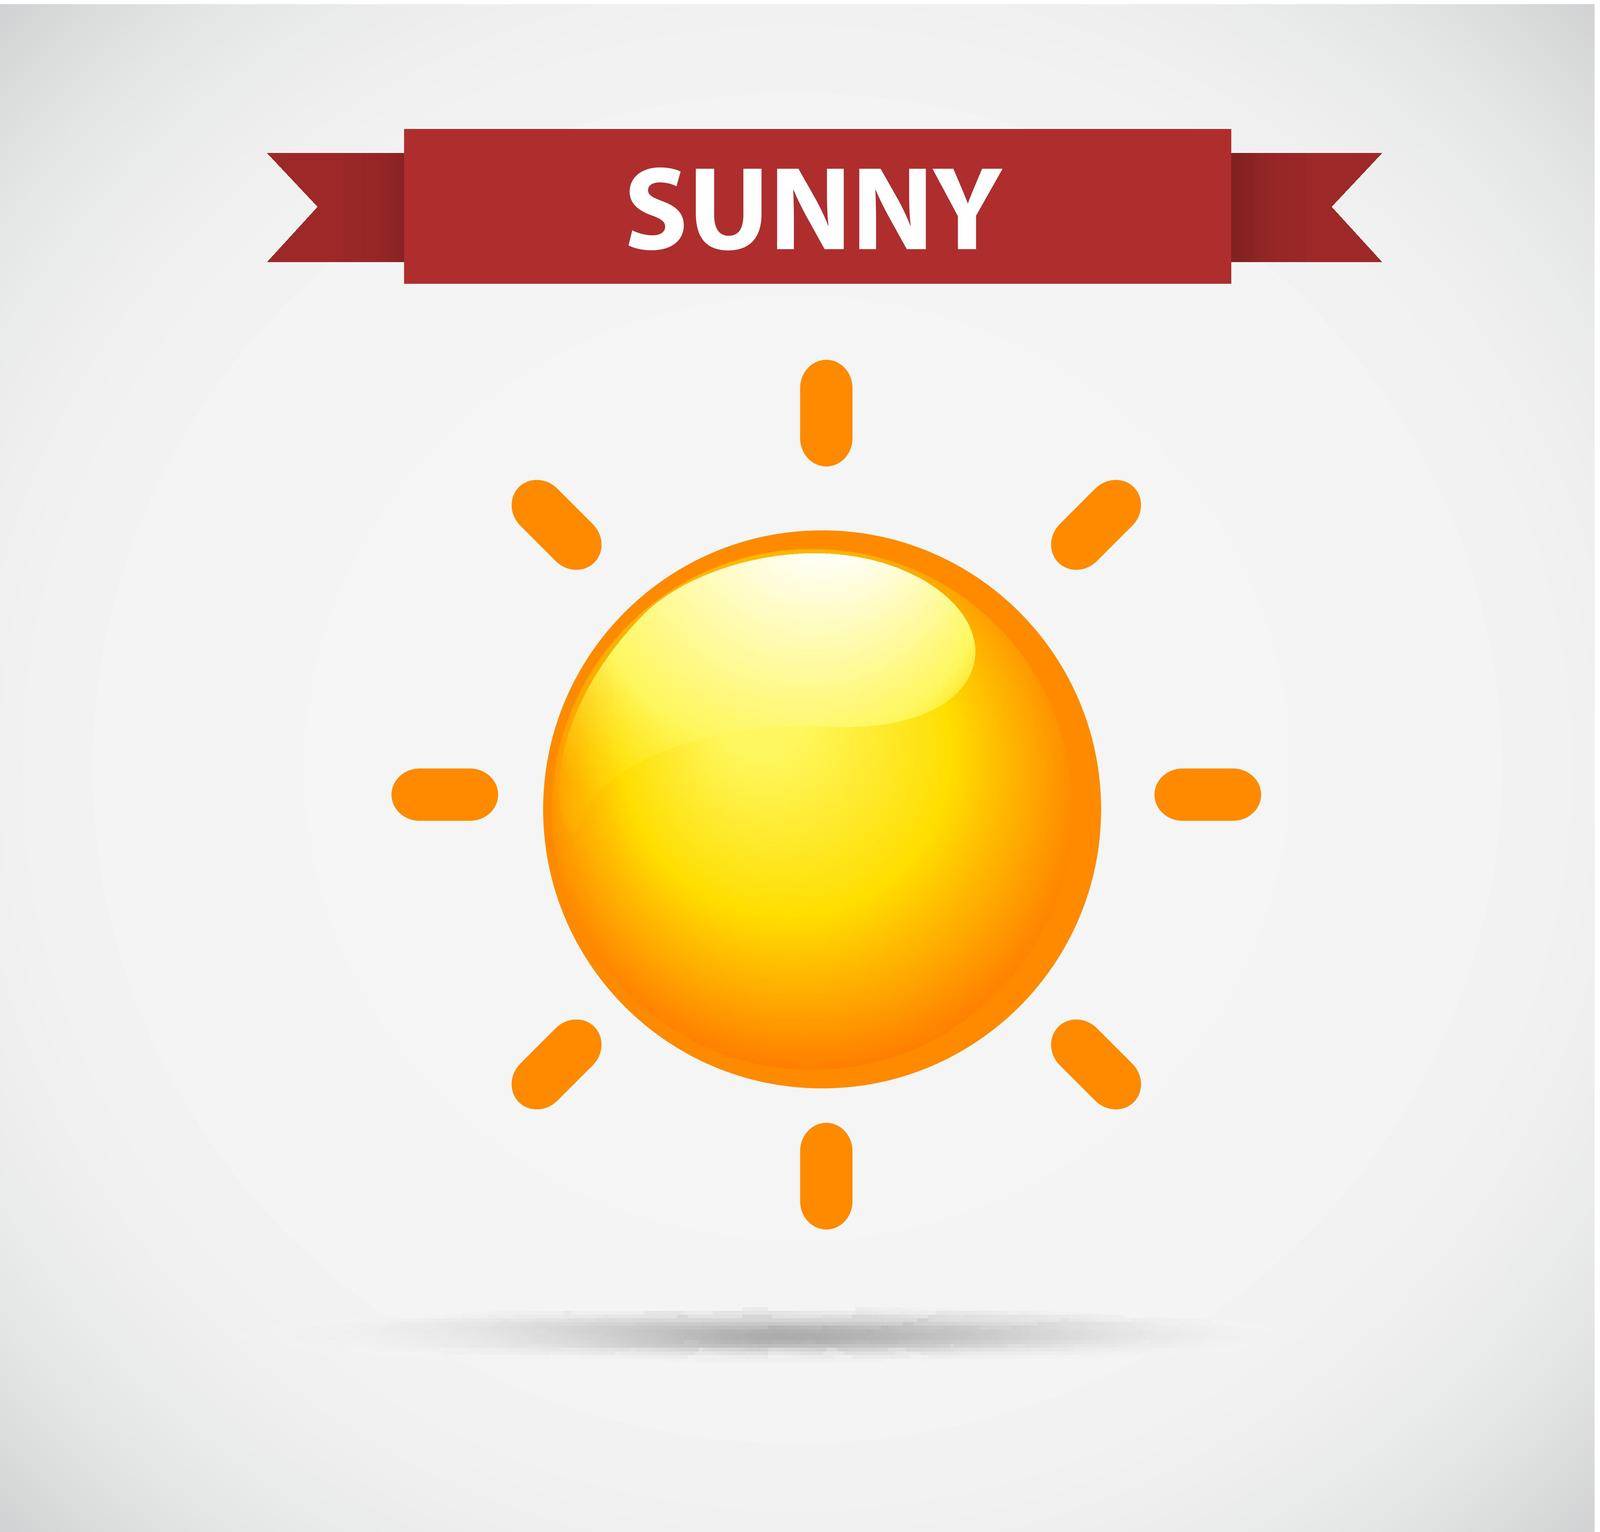 Weather icon design for sunny illustration